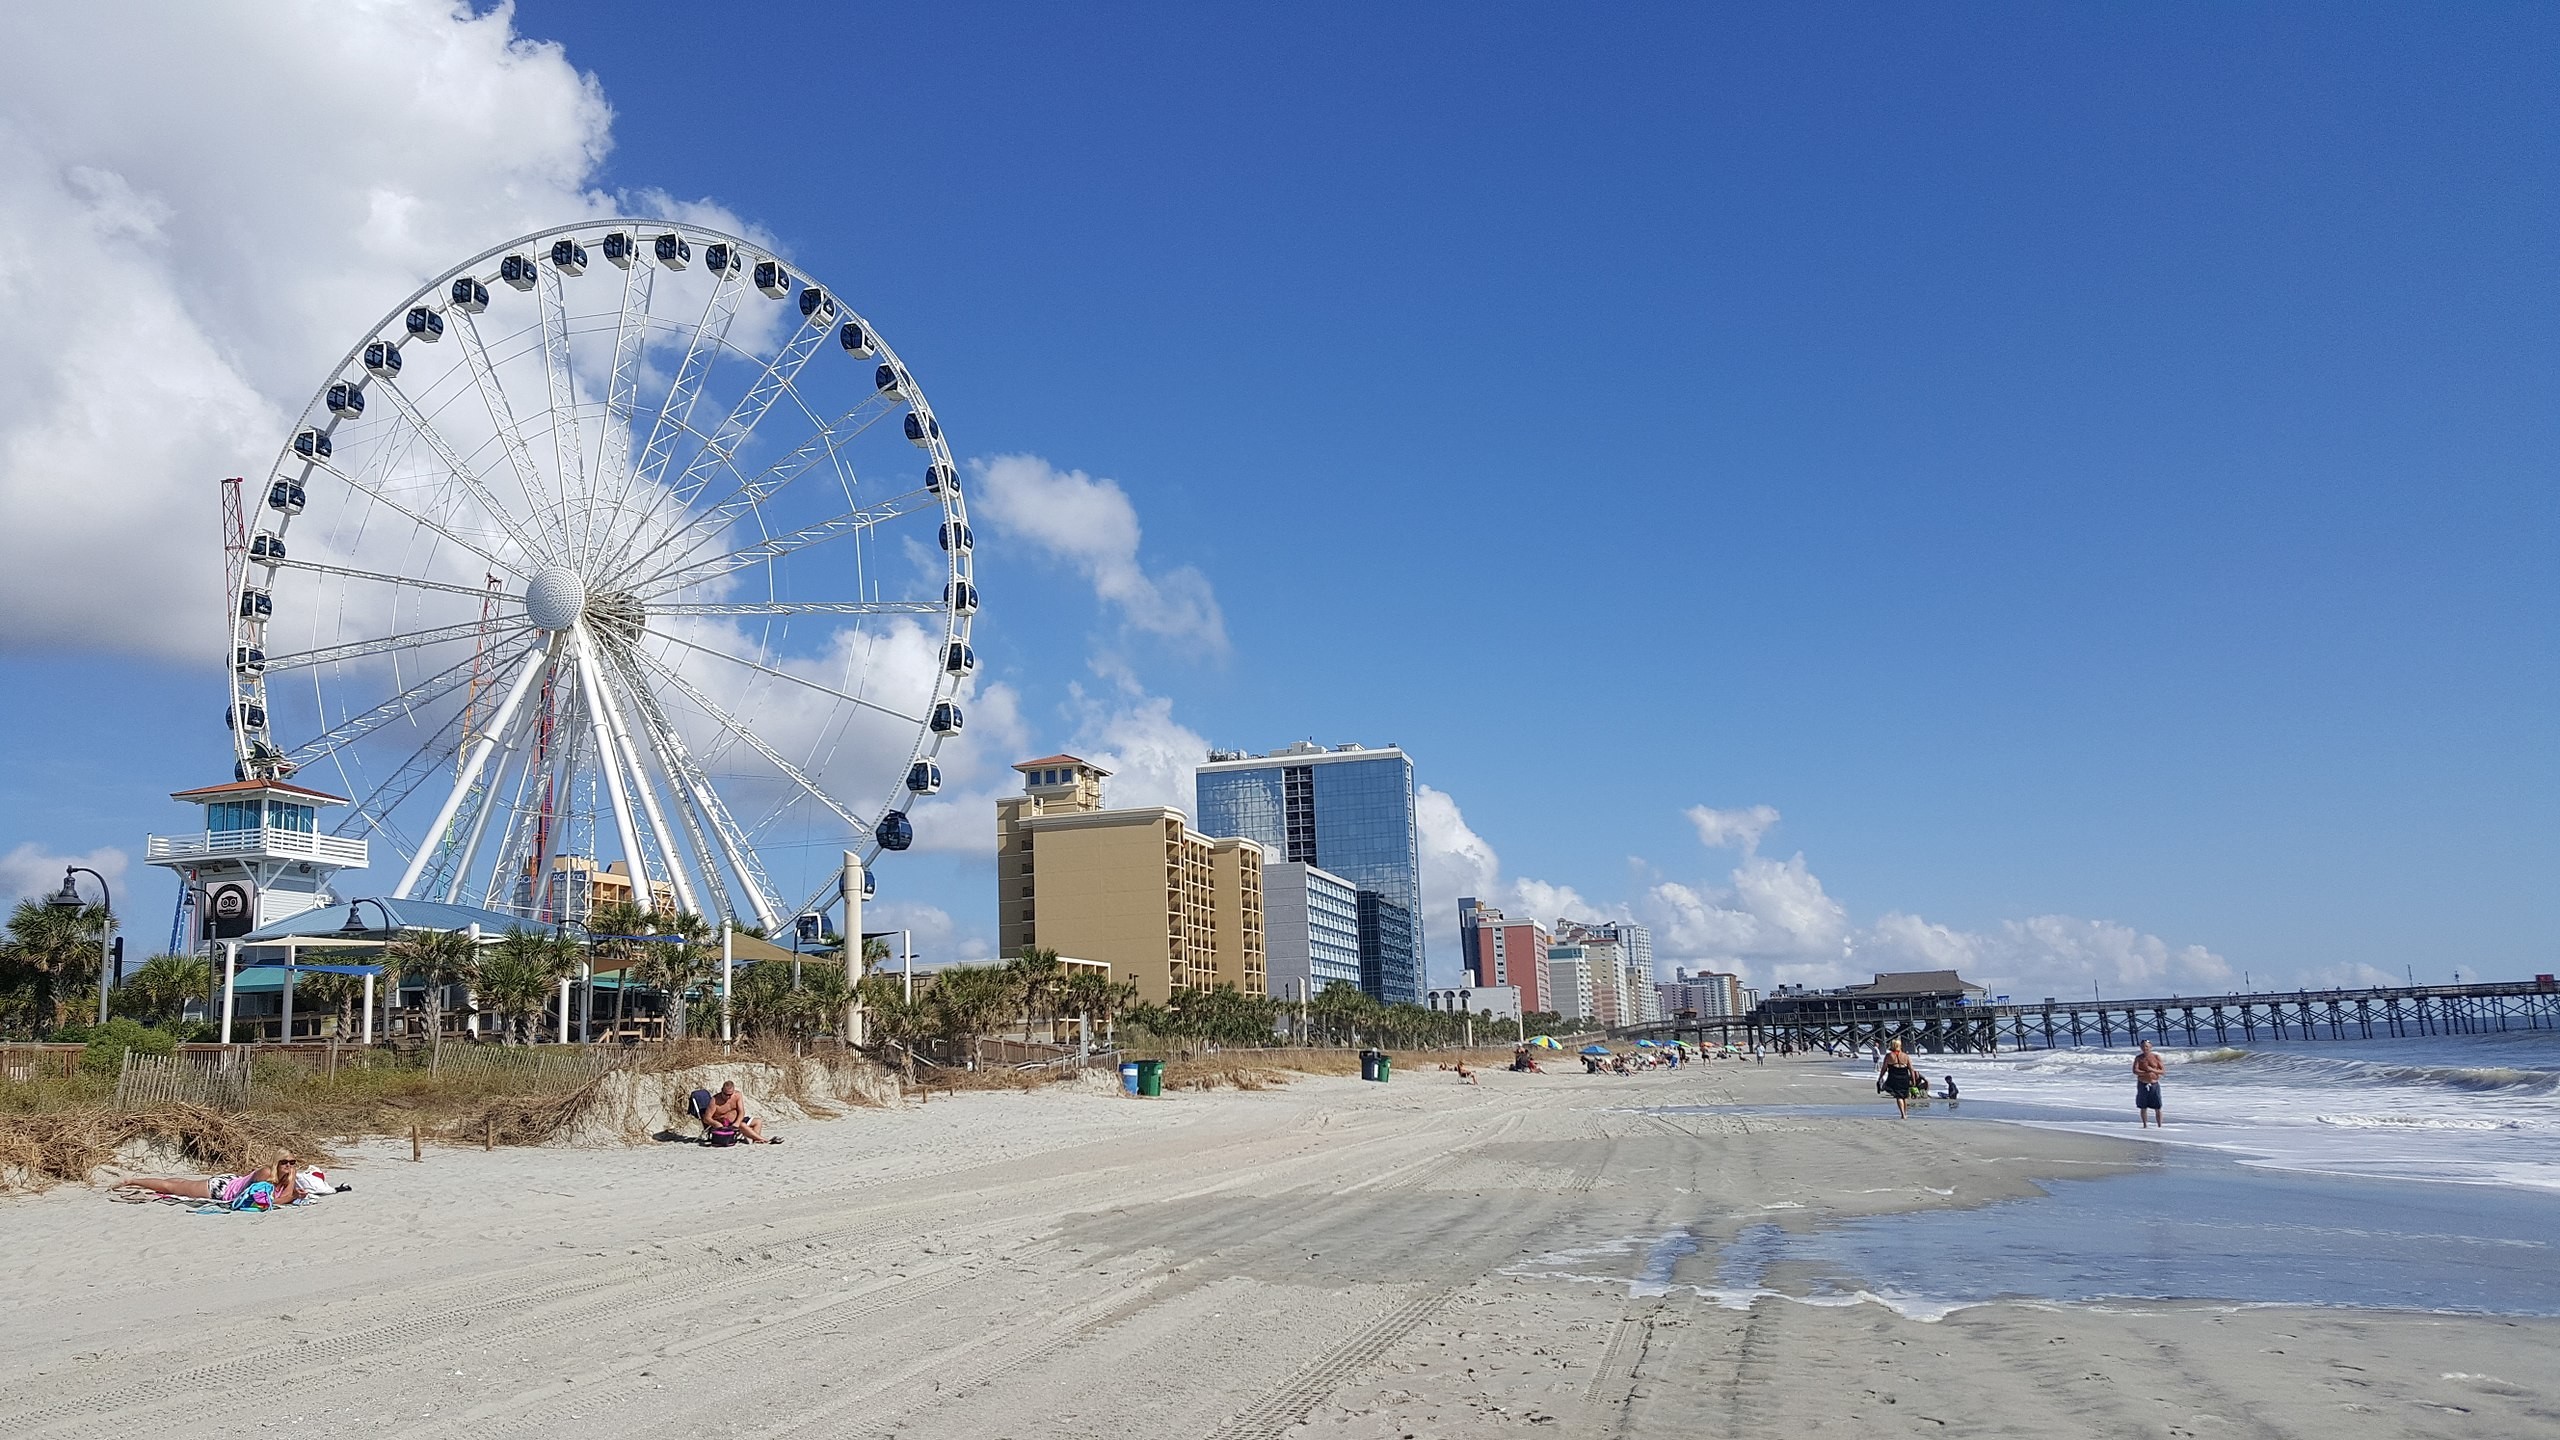 2560x1440 The 20 best things to do in Myrtle Beach